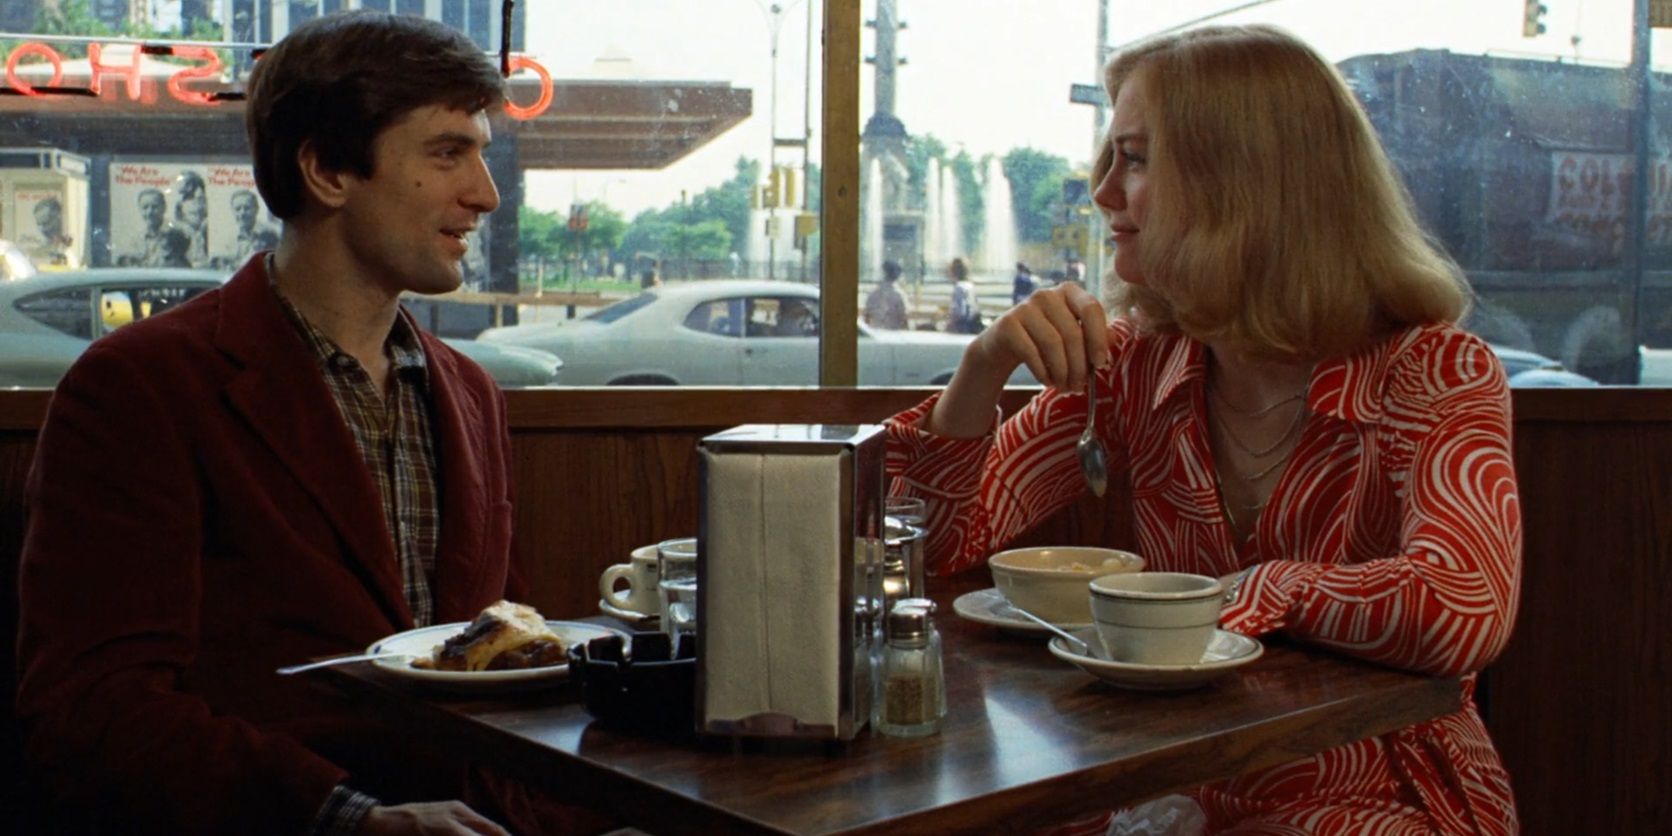 Travis and Betsy on a date in Taxi Driver